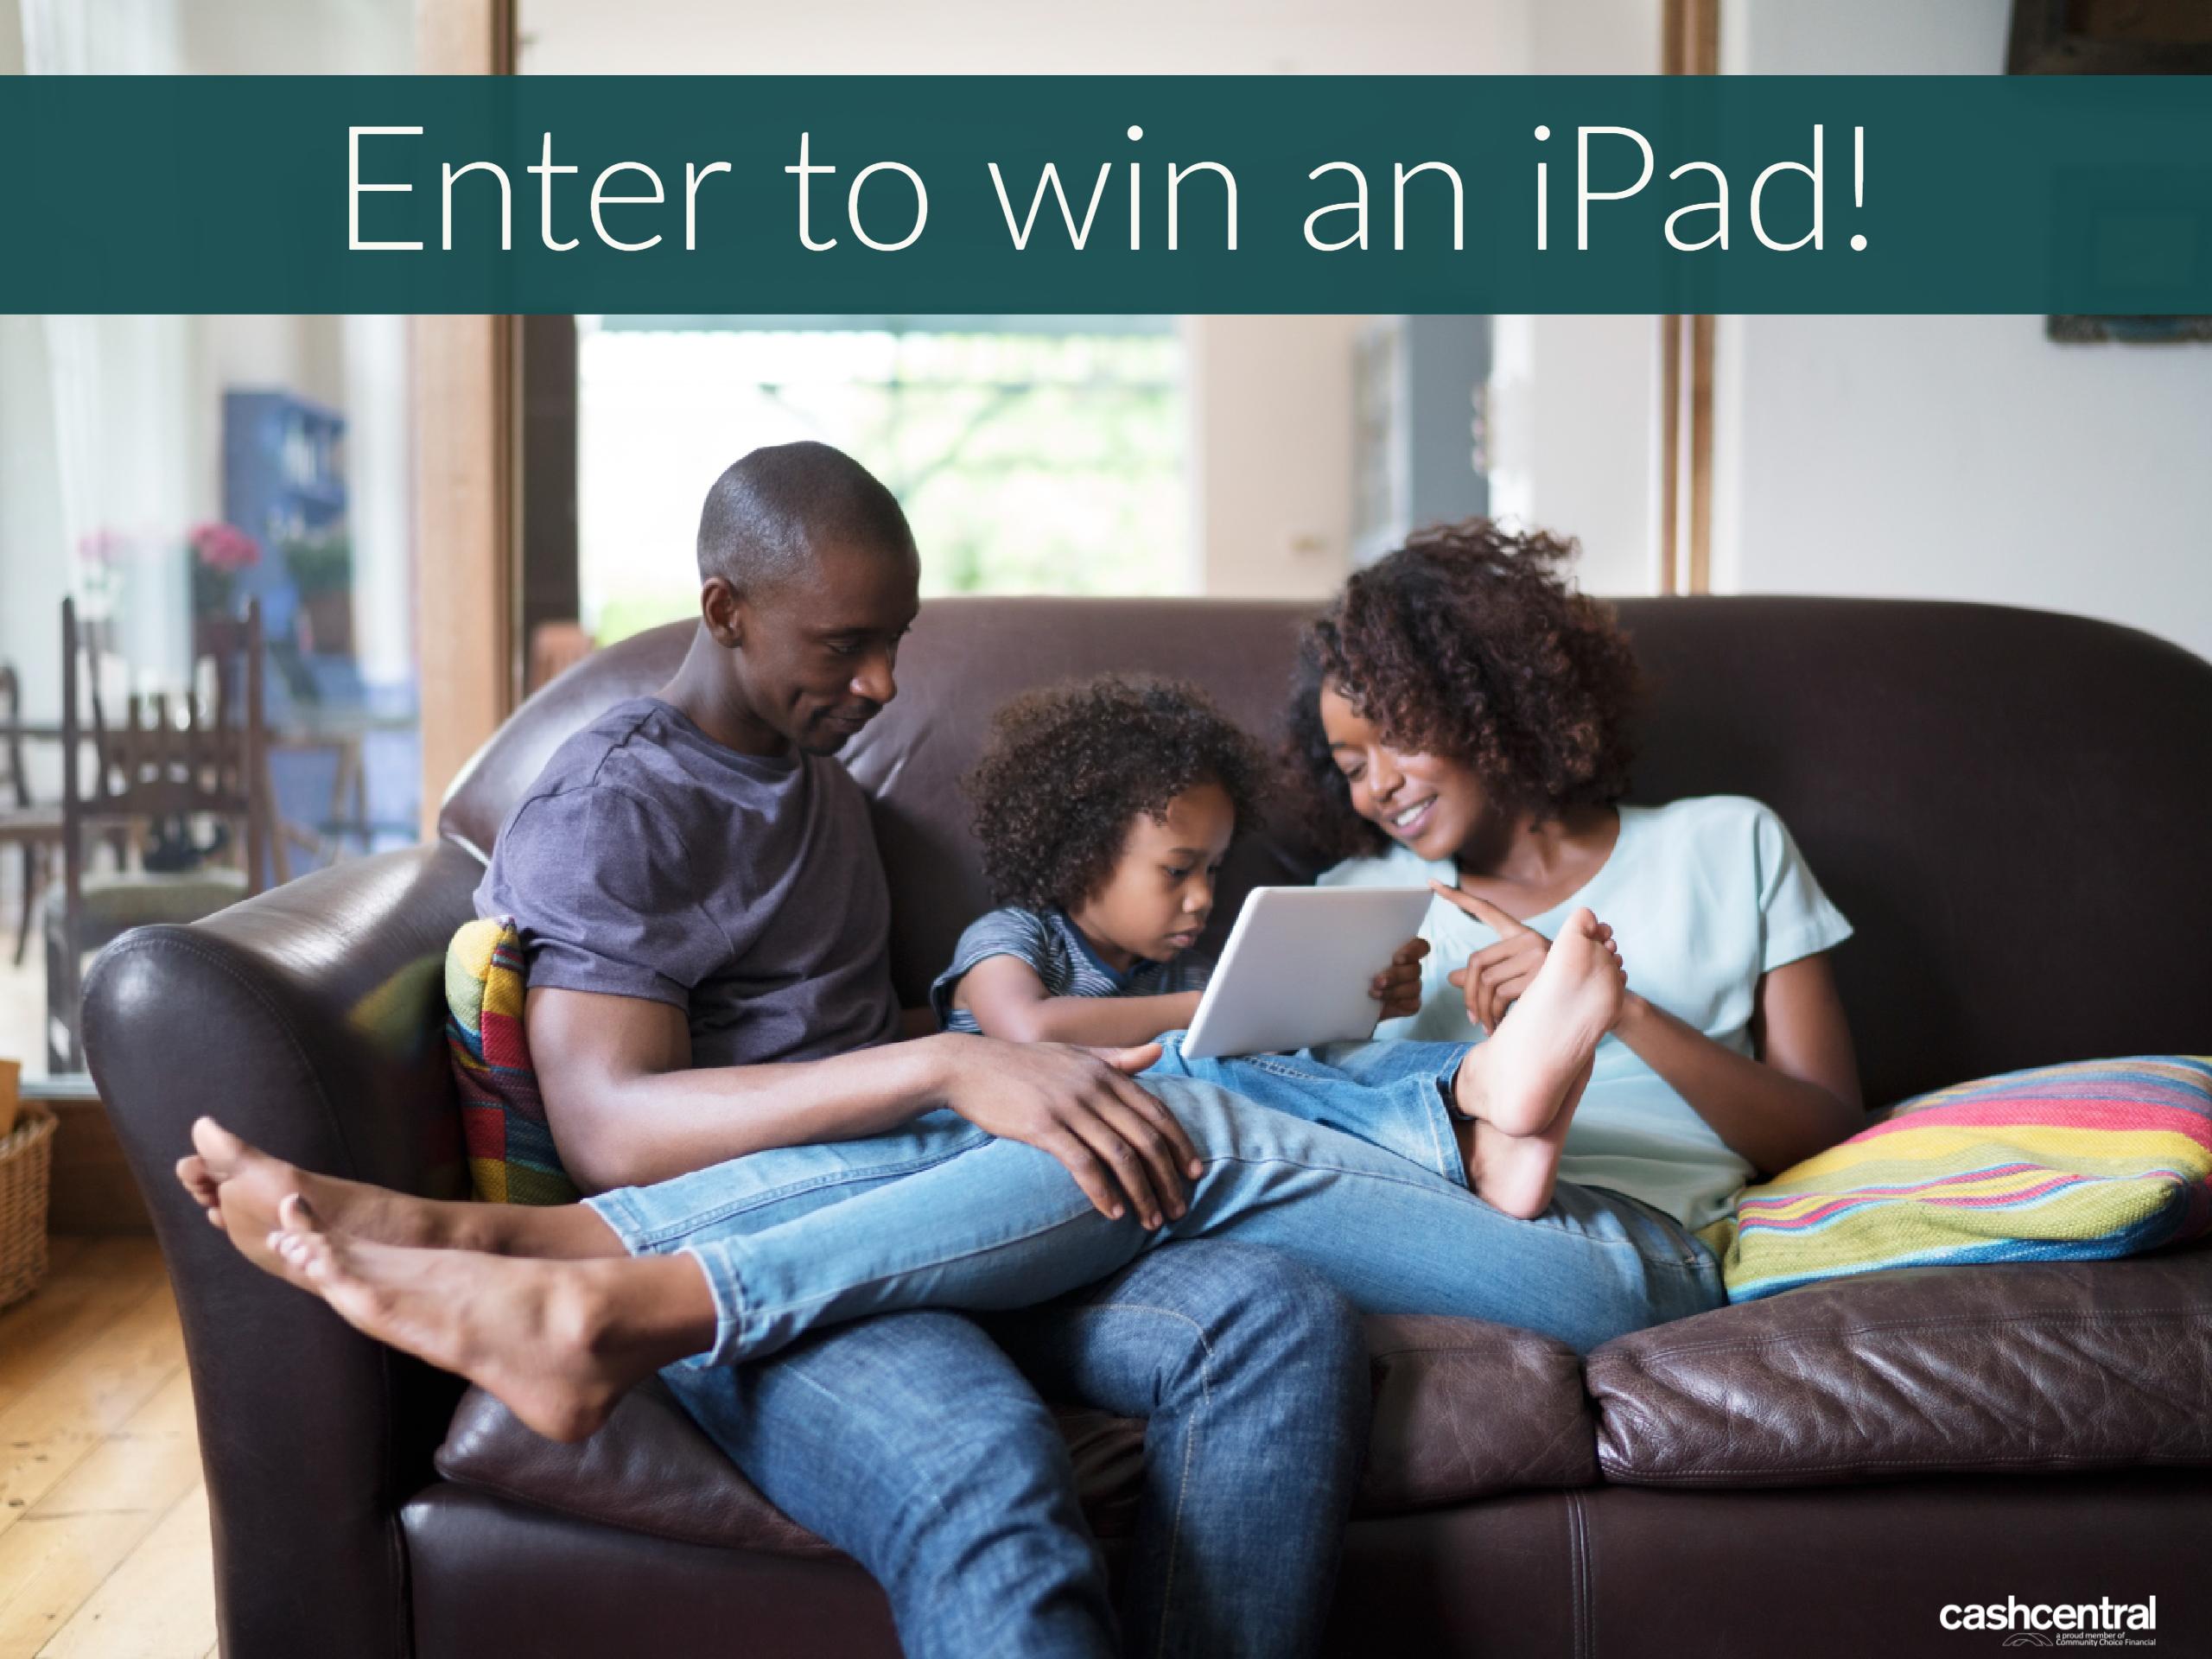 Cash Central iPad Sweepstakes